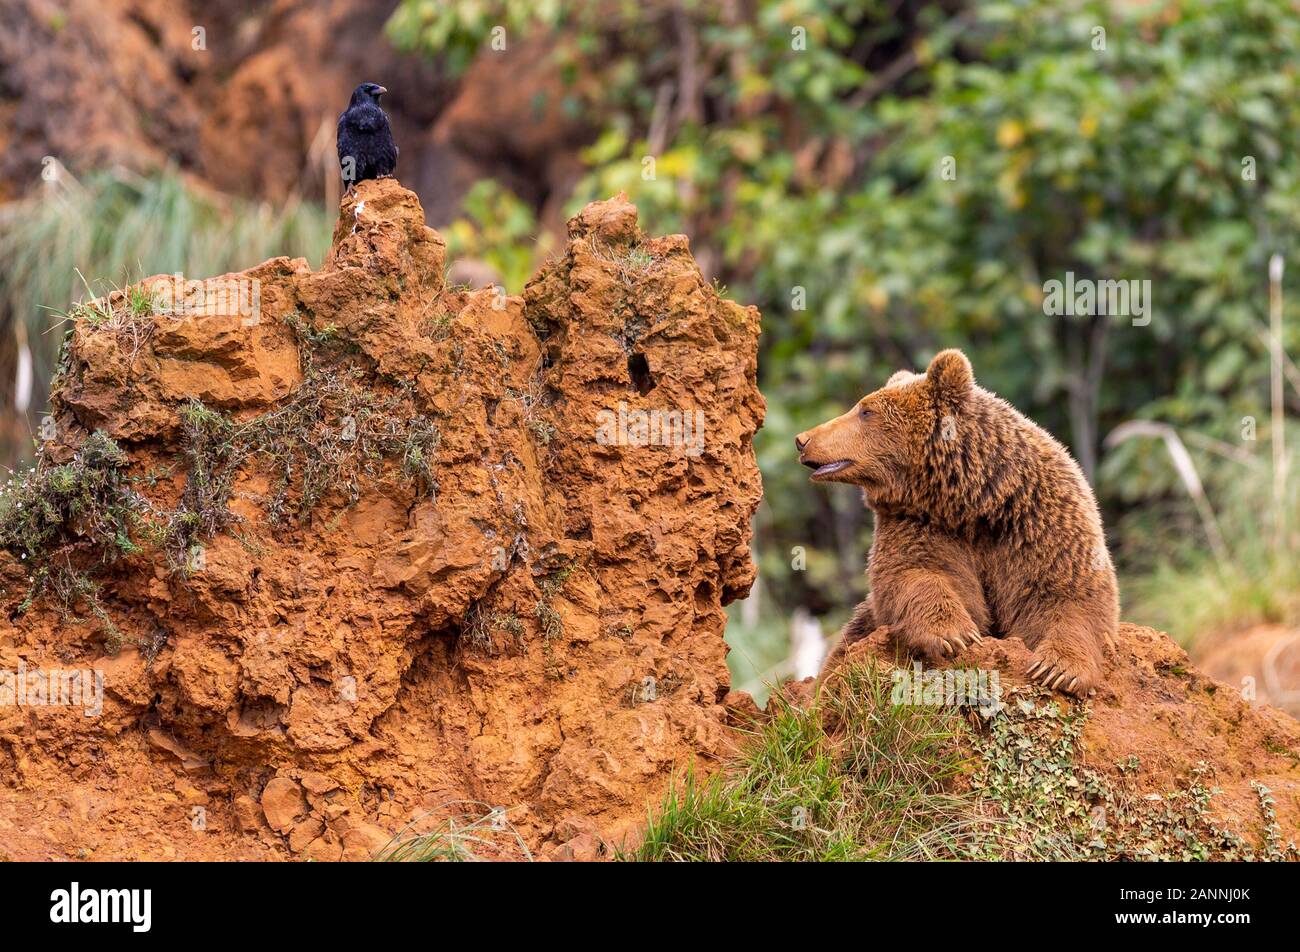 Brown bear and black raven in the Cabarceno Natural Park, Spain Stock Photo